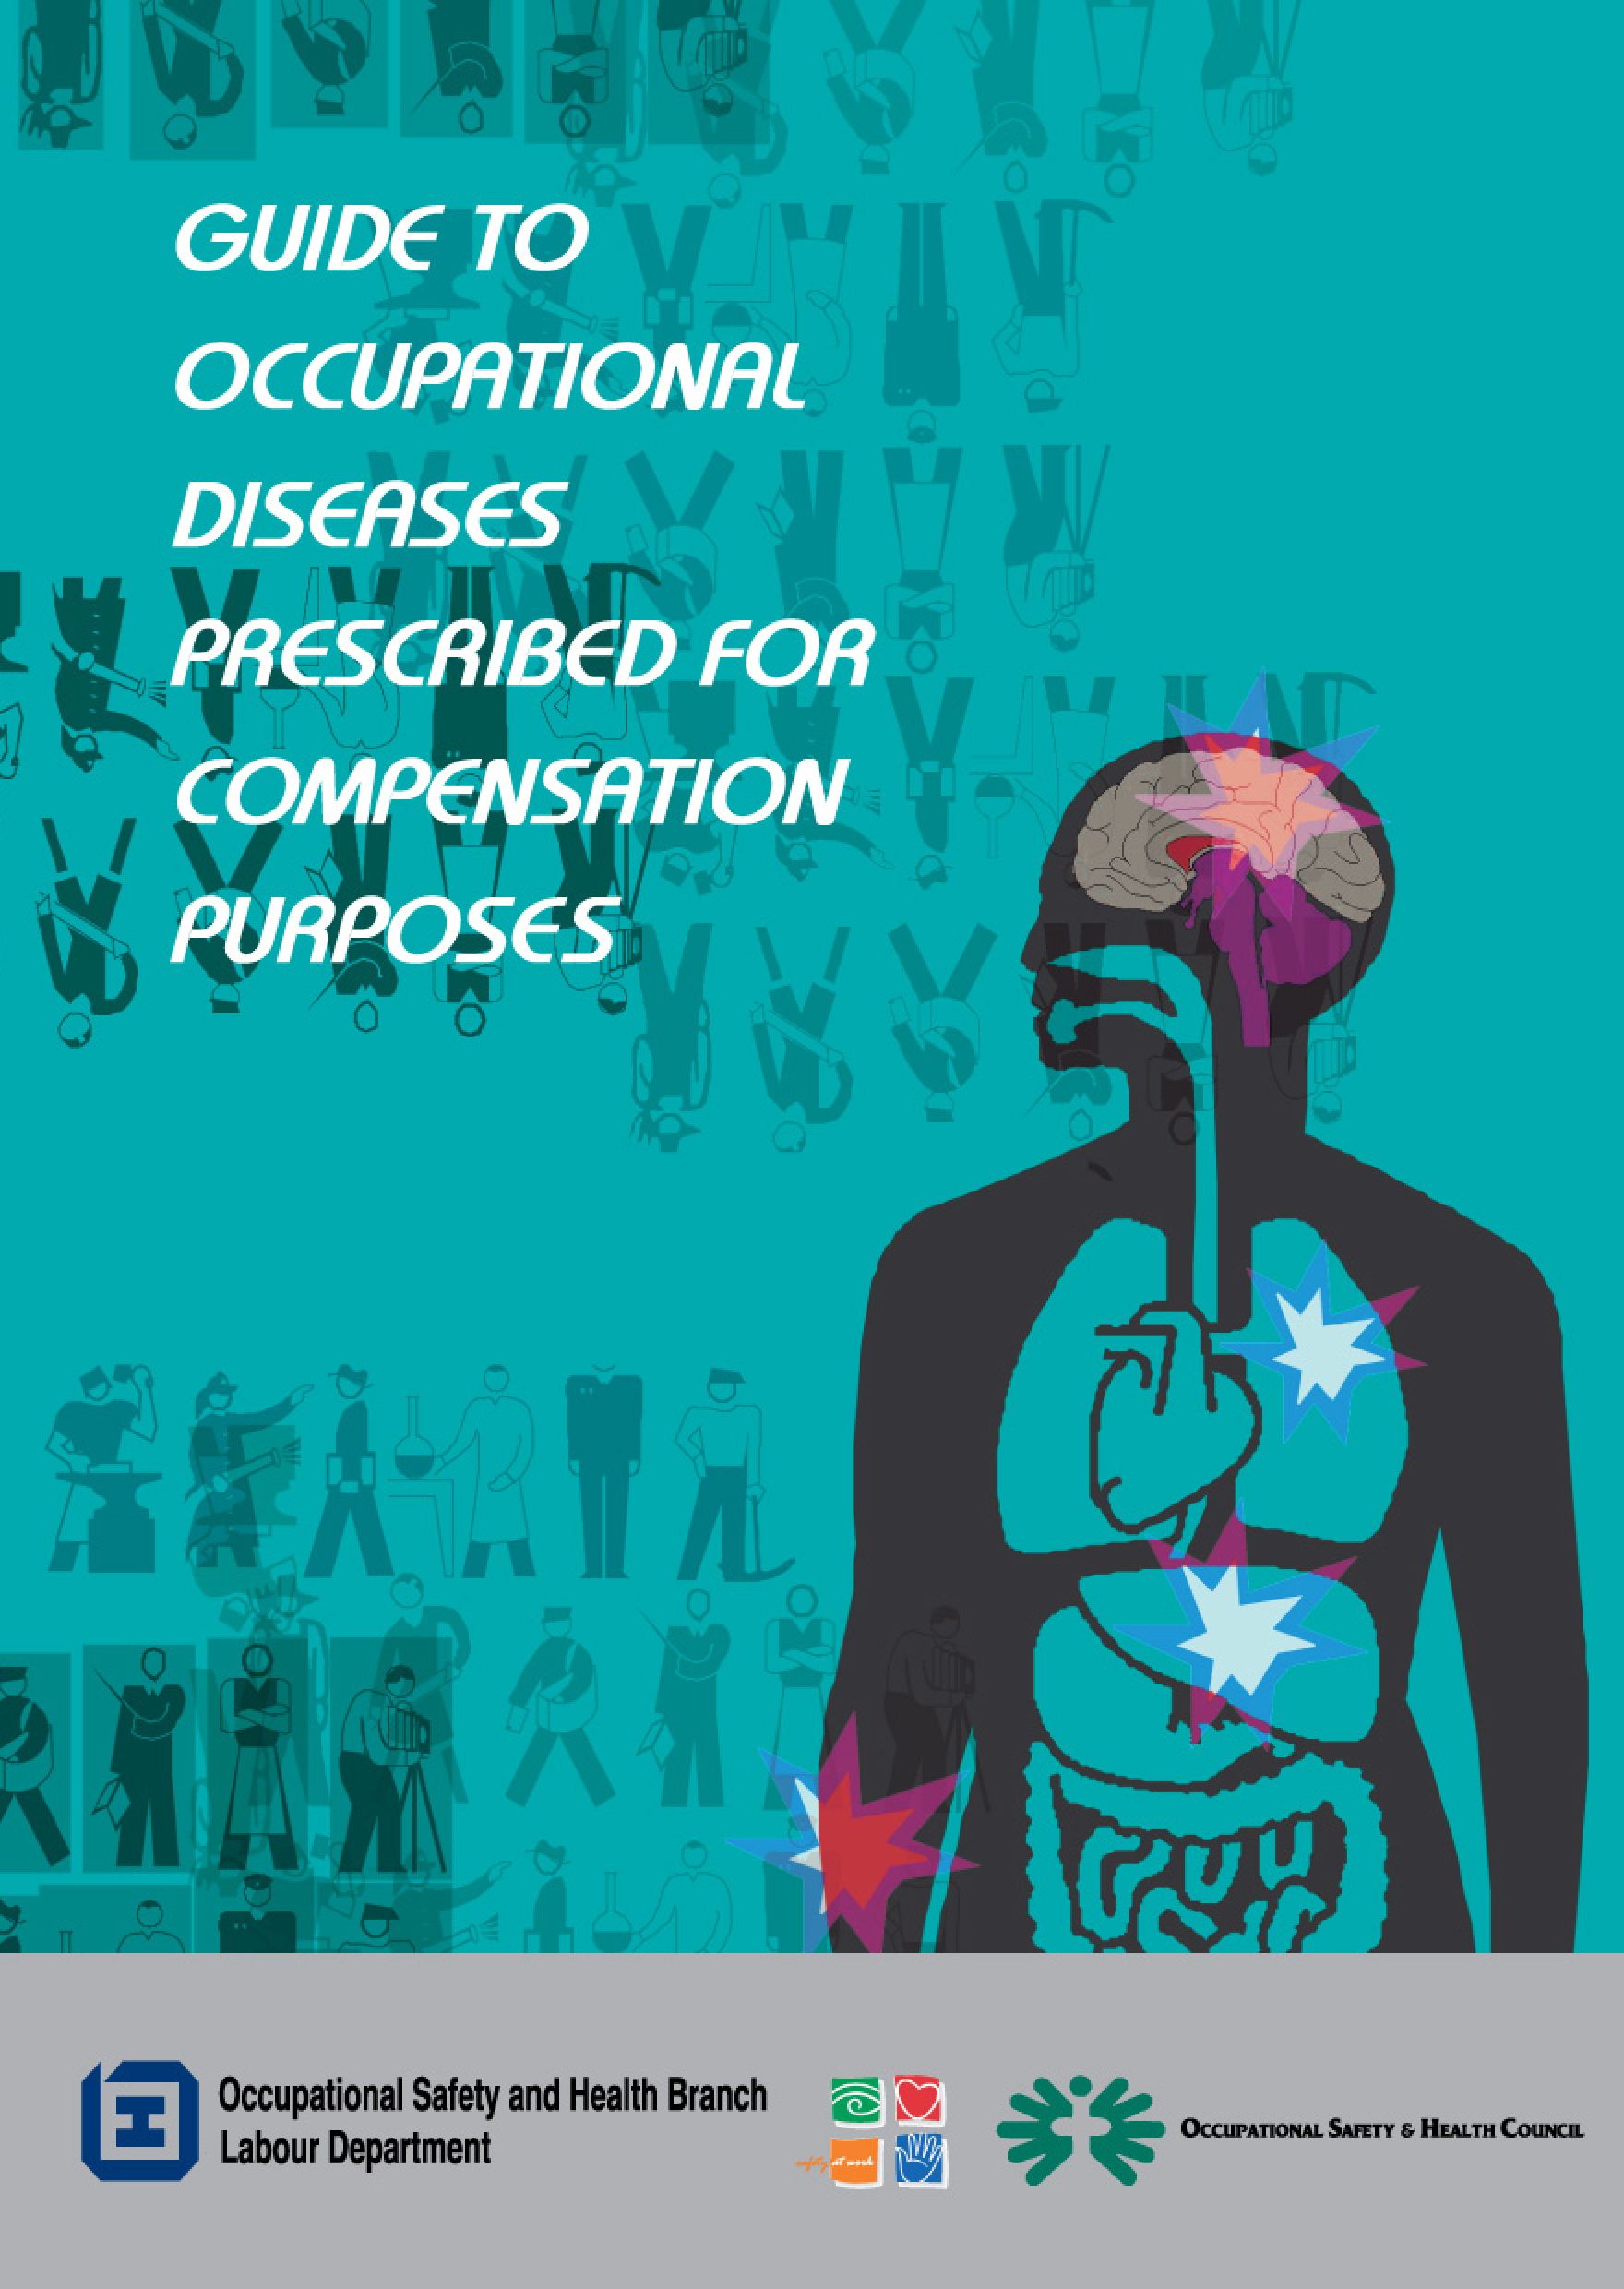 Guide to Occupational Diseases Prescribed for Compensation Purposes(published by the Labour Department)